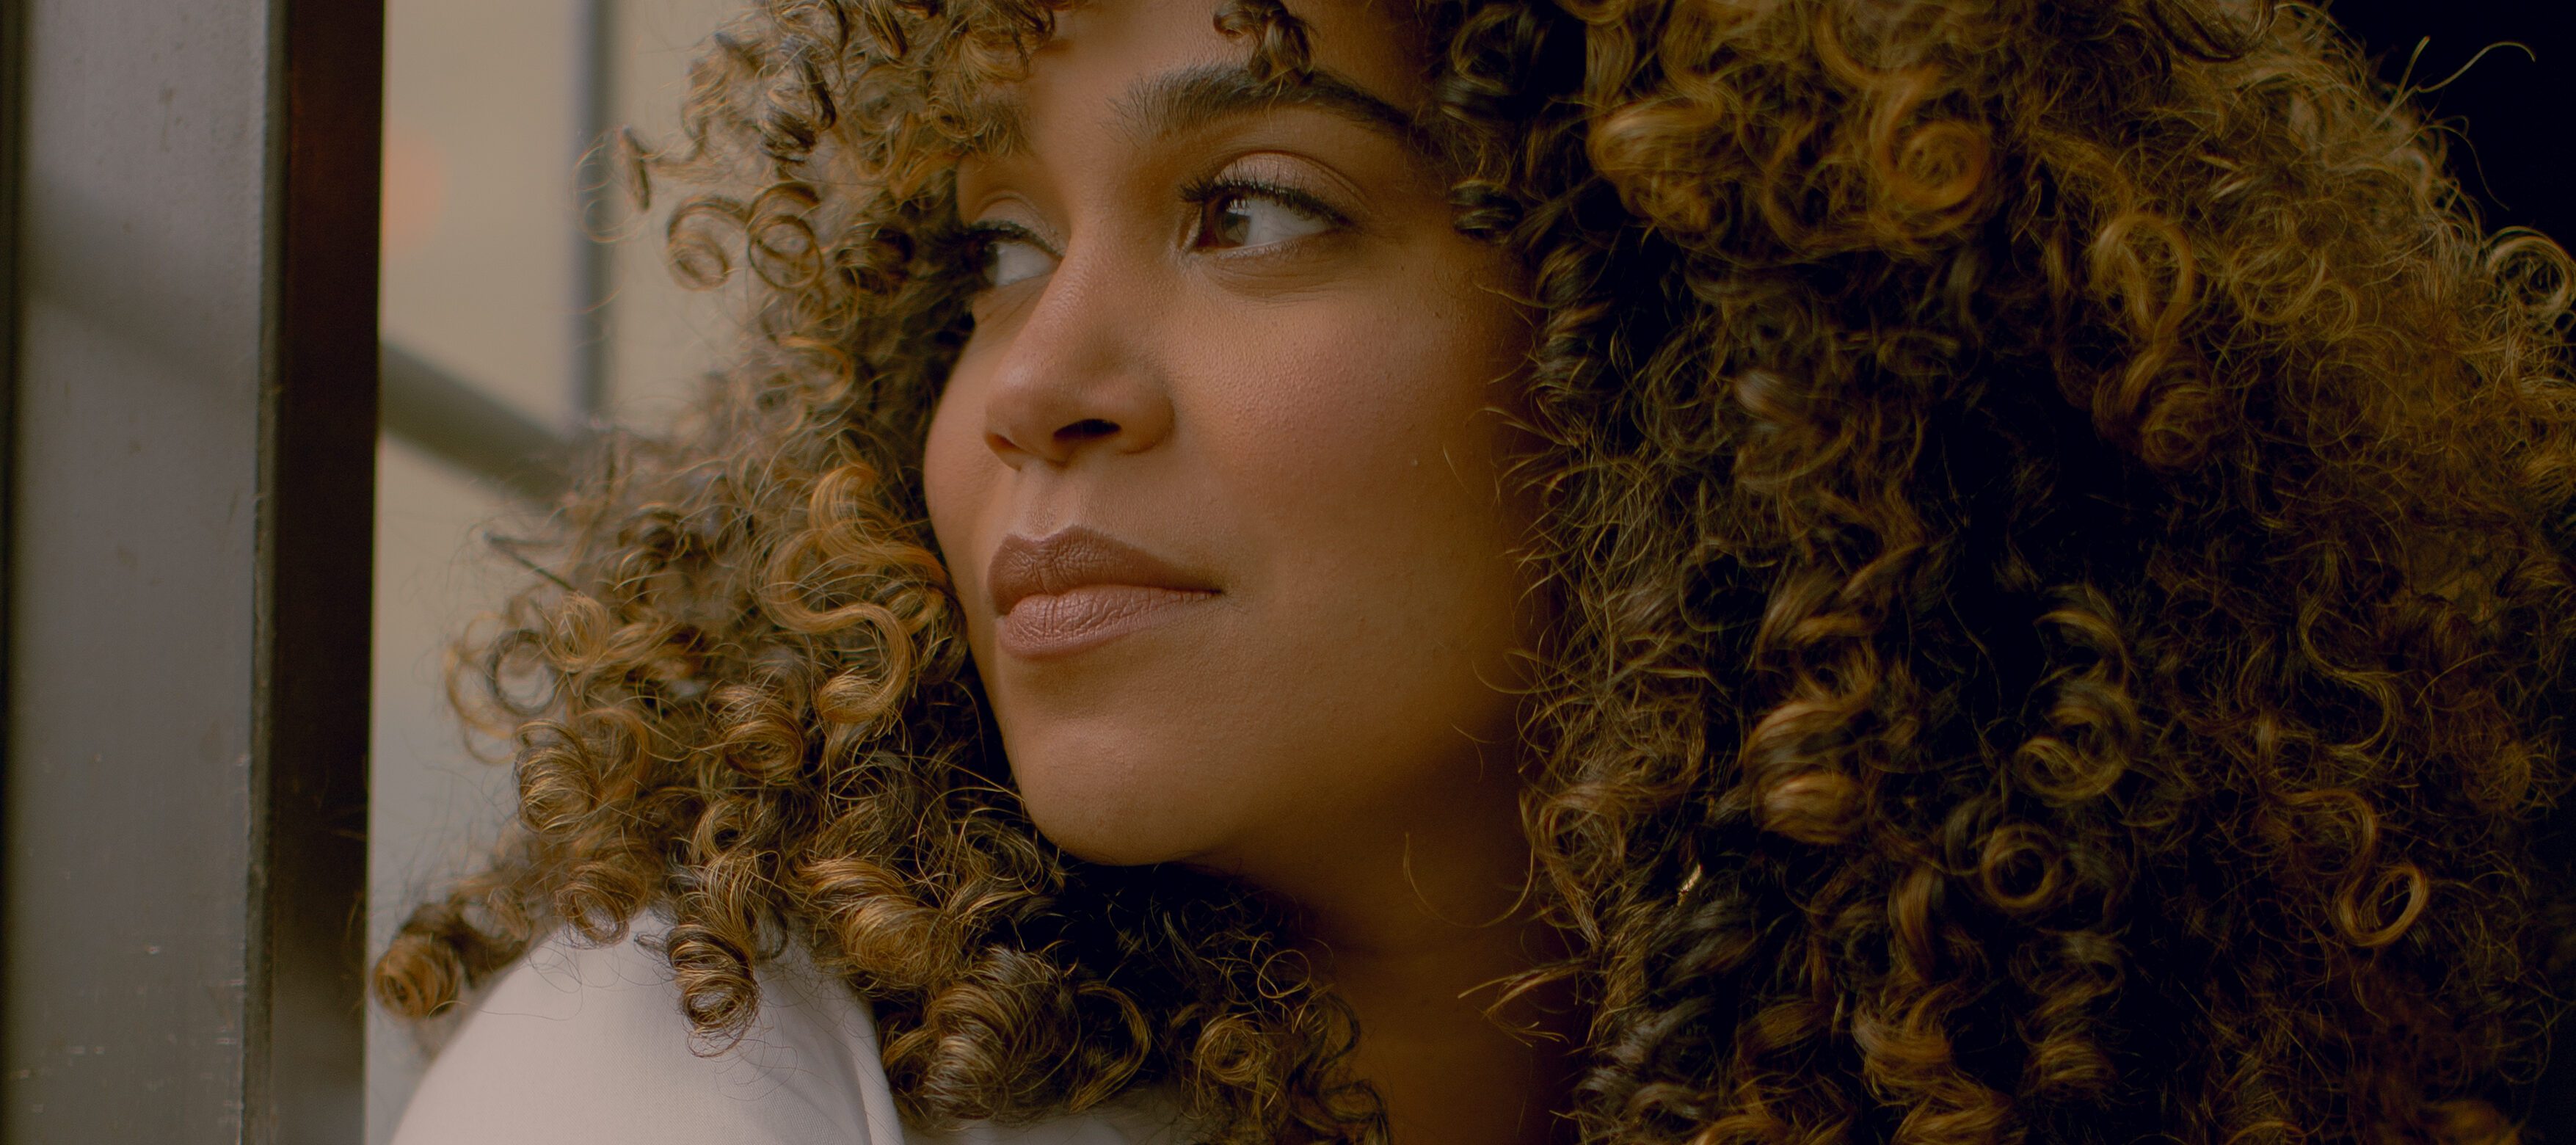 A dark-skinned woman with shoulder-length curly hair sits or stands in front of a window, looking over her shoulder and out of it. The light is somewhat dim. She wears a white button-up short sleeved shirt.